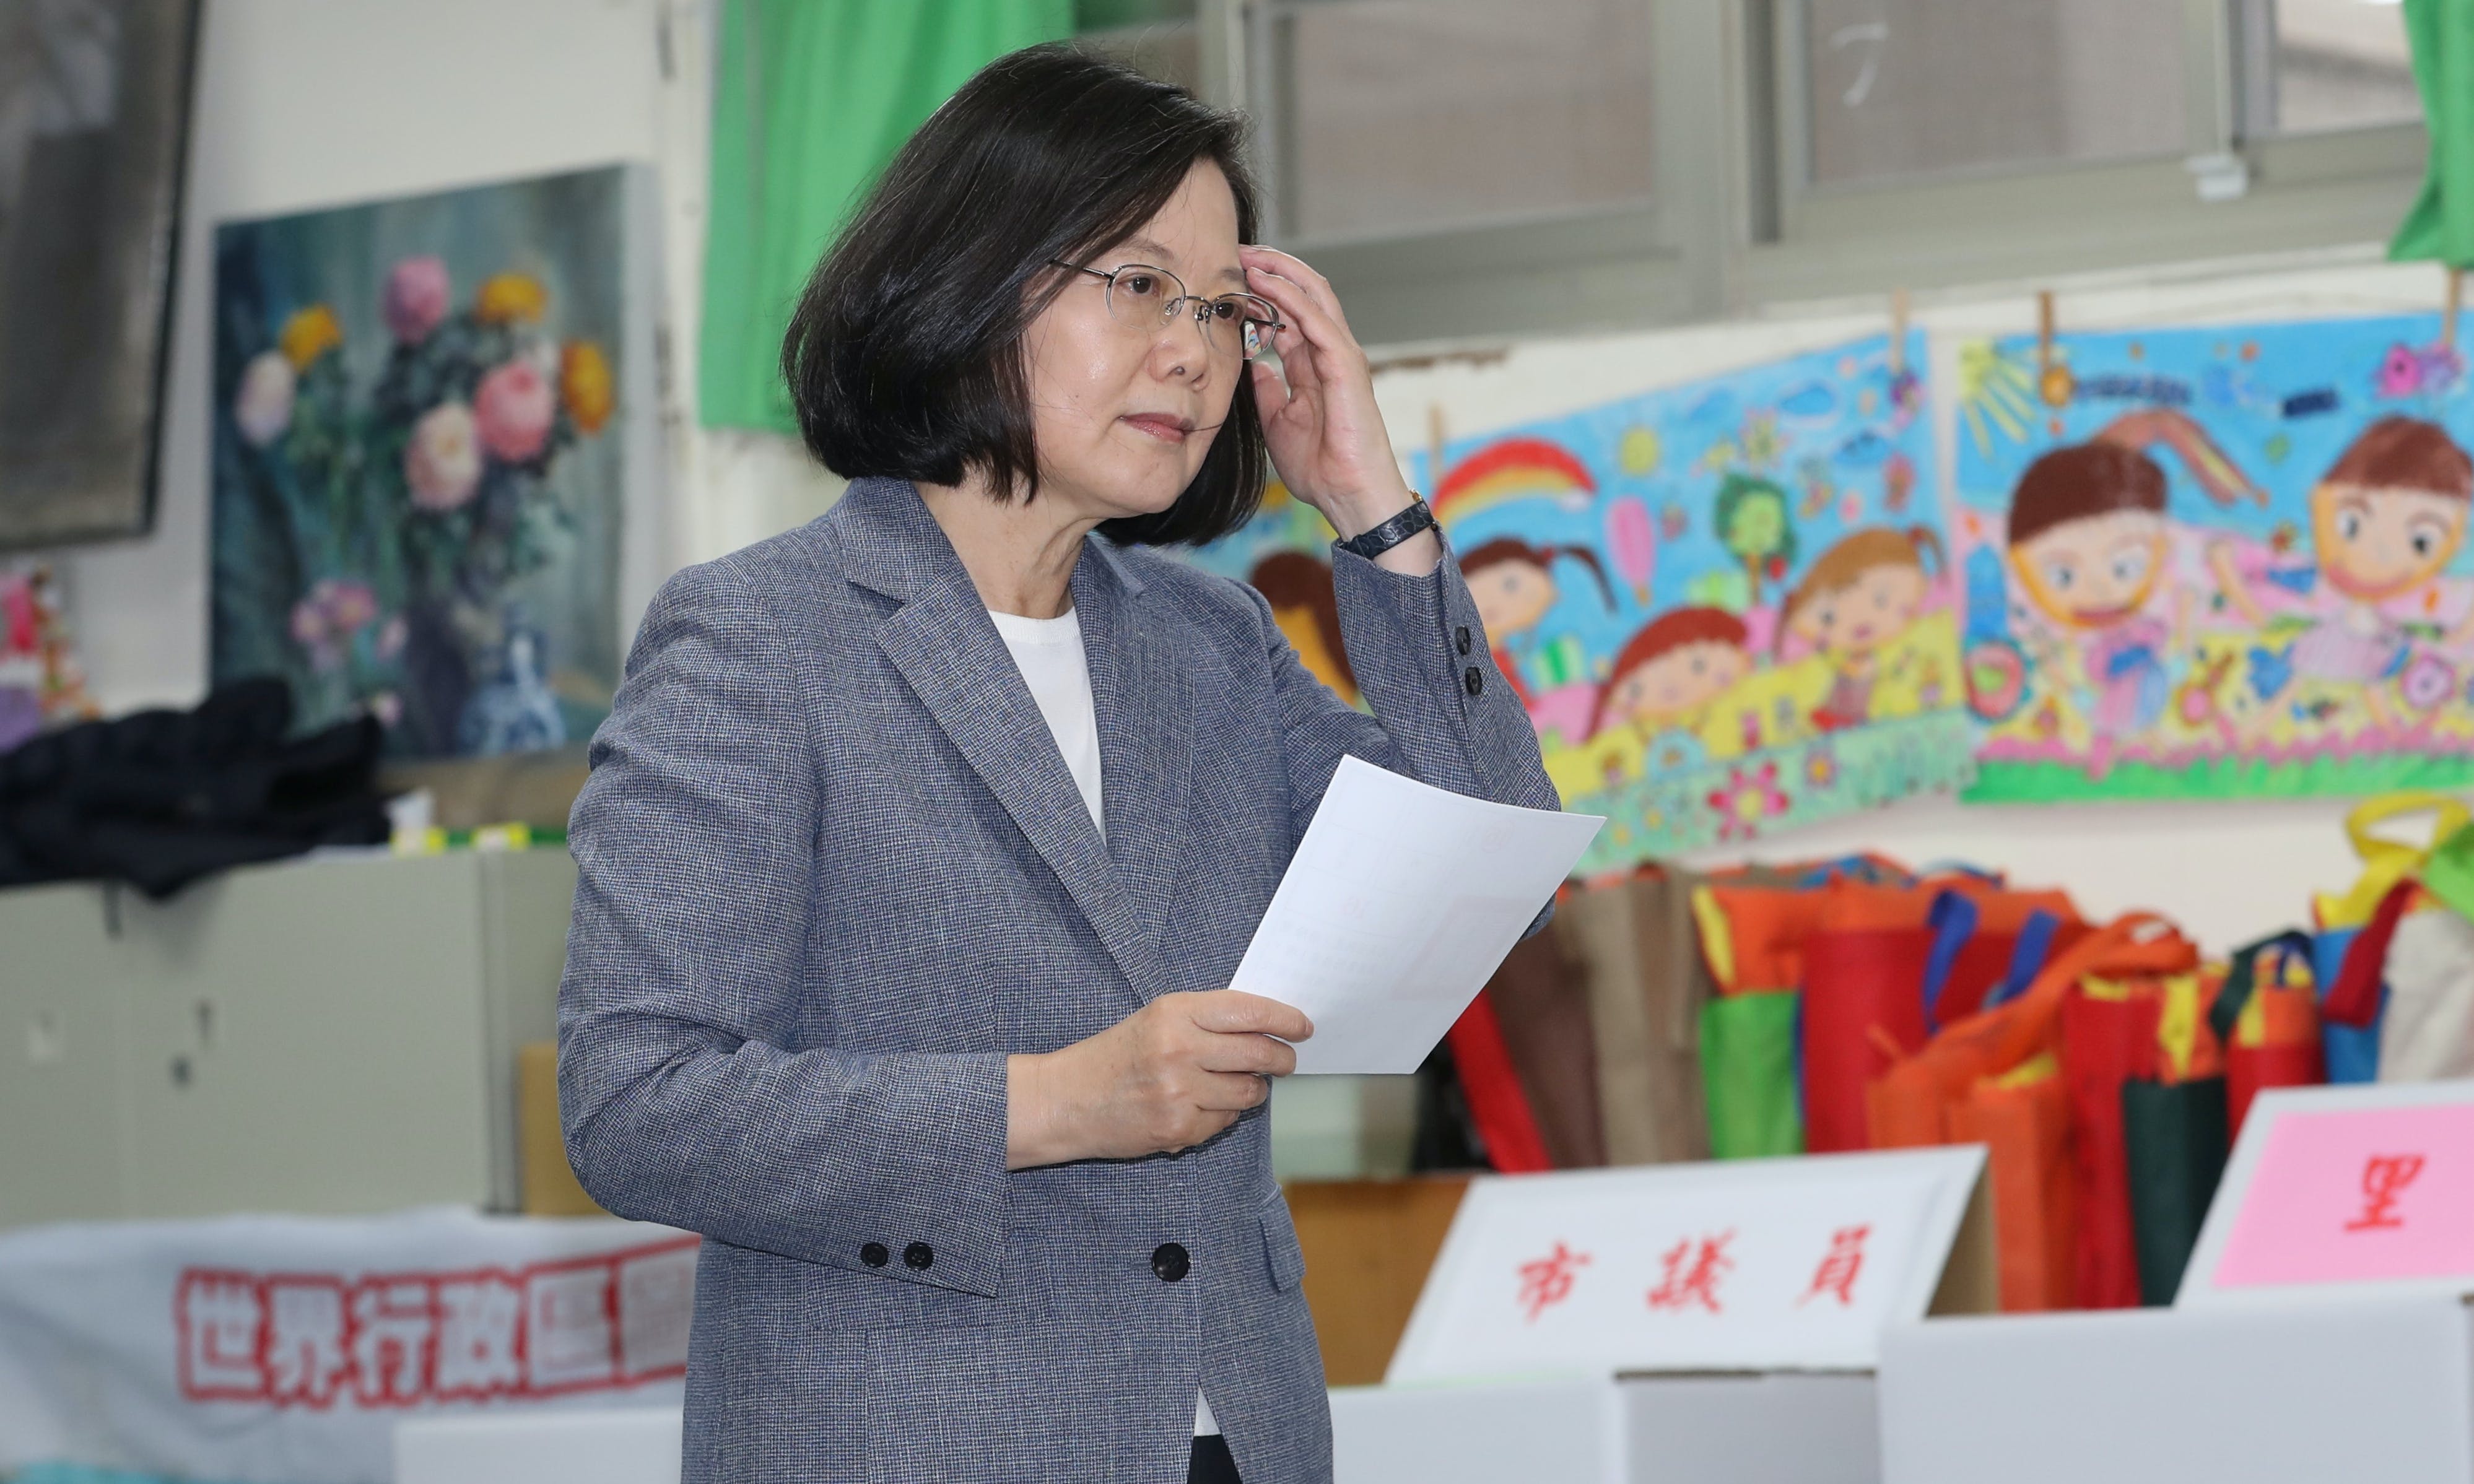 OPINION: Time for Taiwan to End Restrictions on Early and Absentee Voting